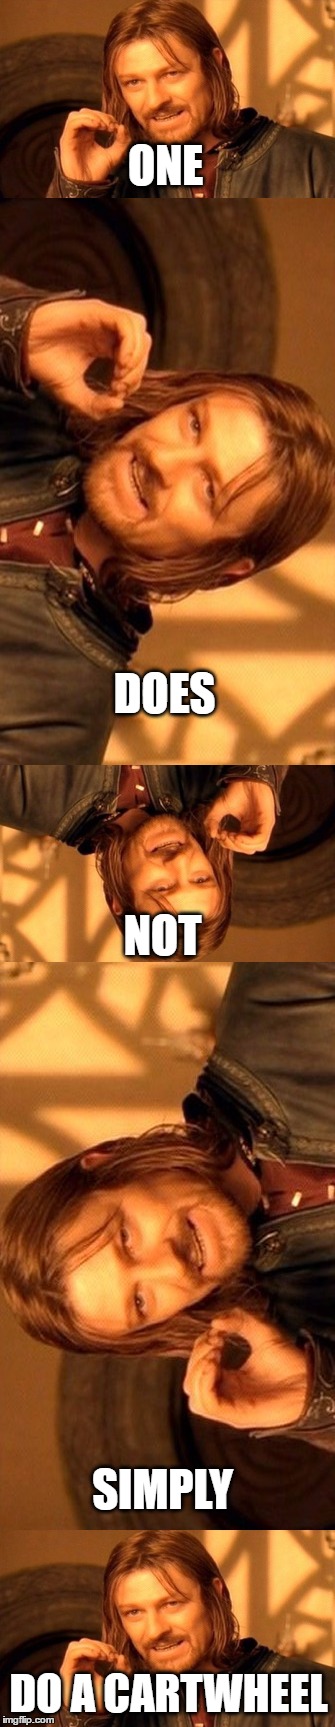 One Does Not Simply | ONE; DOES; NOT; SIMPLY; DO A CARTWHEEL | image tagged in memes,one does not simply,cartwheel | made w/ Imgflip meme maker